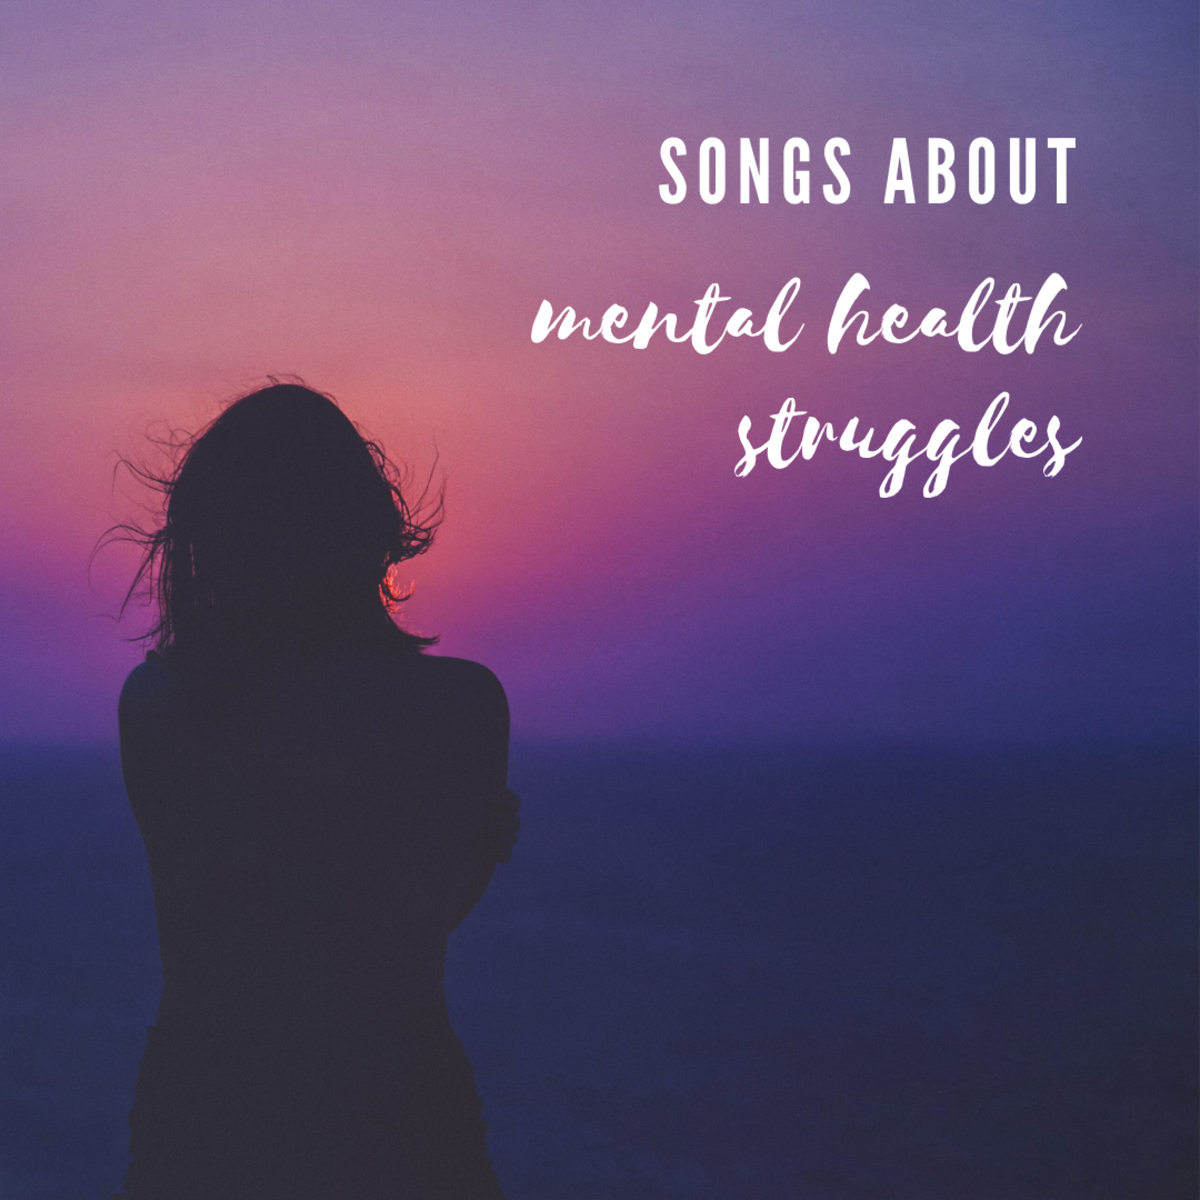 35 best songs about anxiety, depression and other mental illnesses